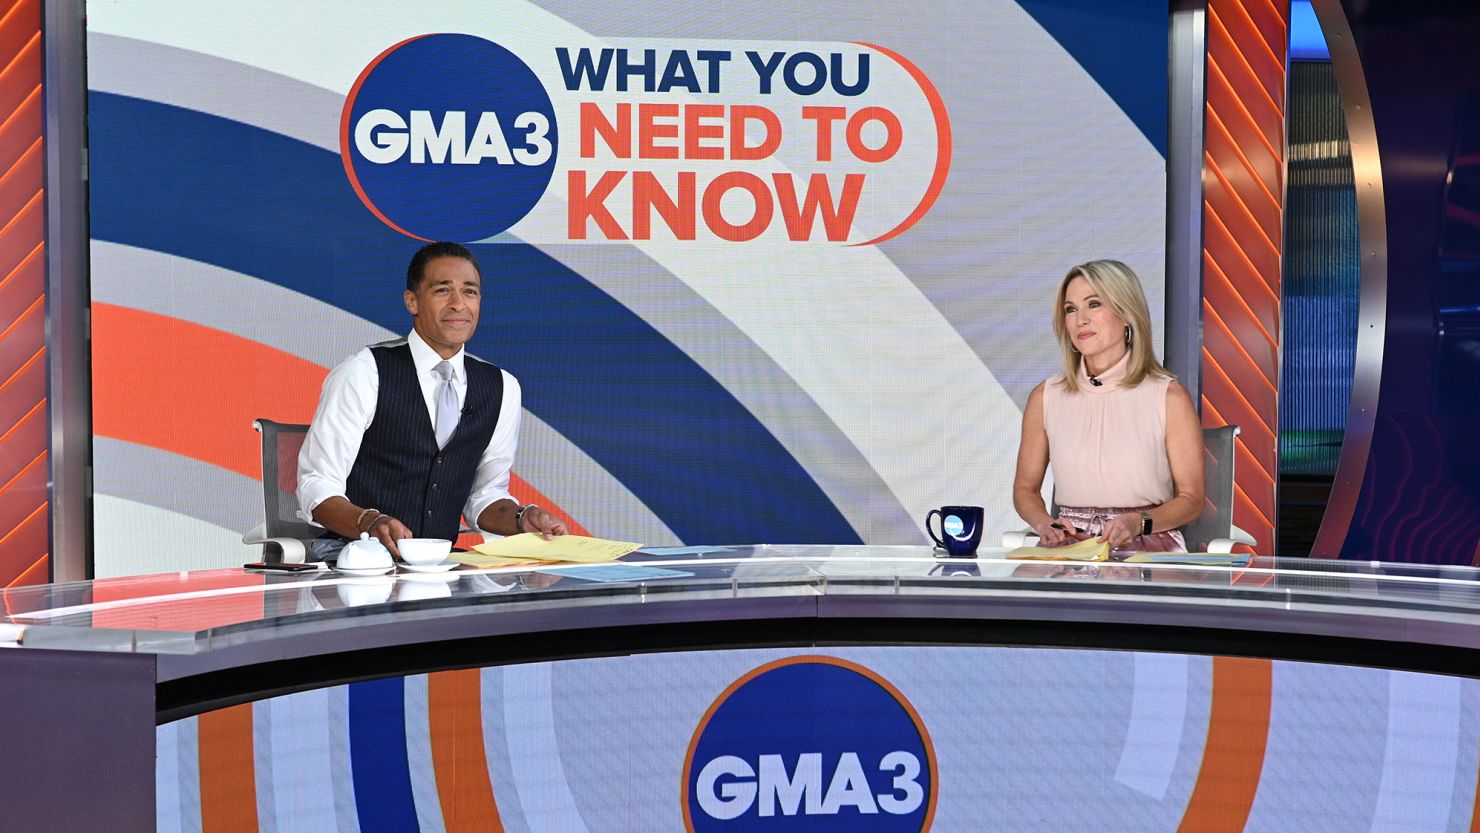 GMA3: What You Need to Know on Tuesday, October 5, 2021, with T.J. Holmes and Amy Robach. 